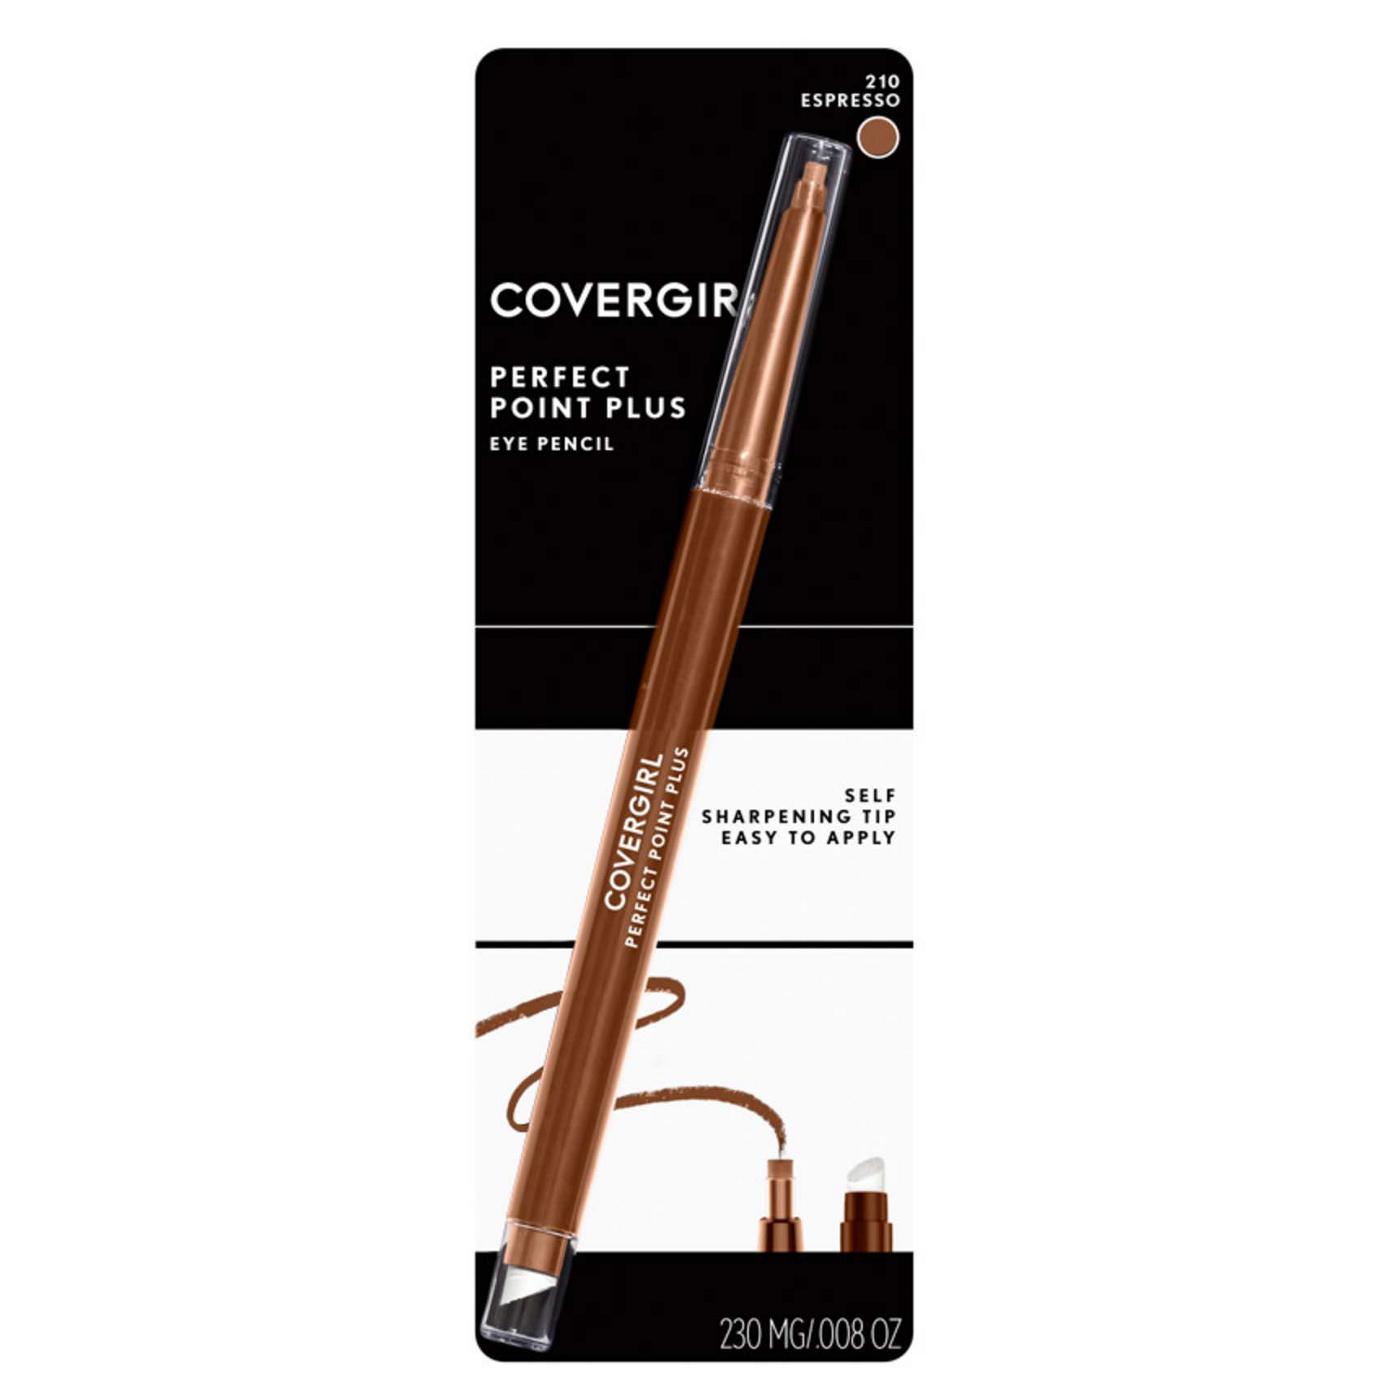 Covergirl Perfect Point Plus Eyeliner 210 Espresso; image 1 of 6